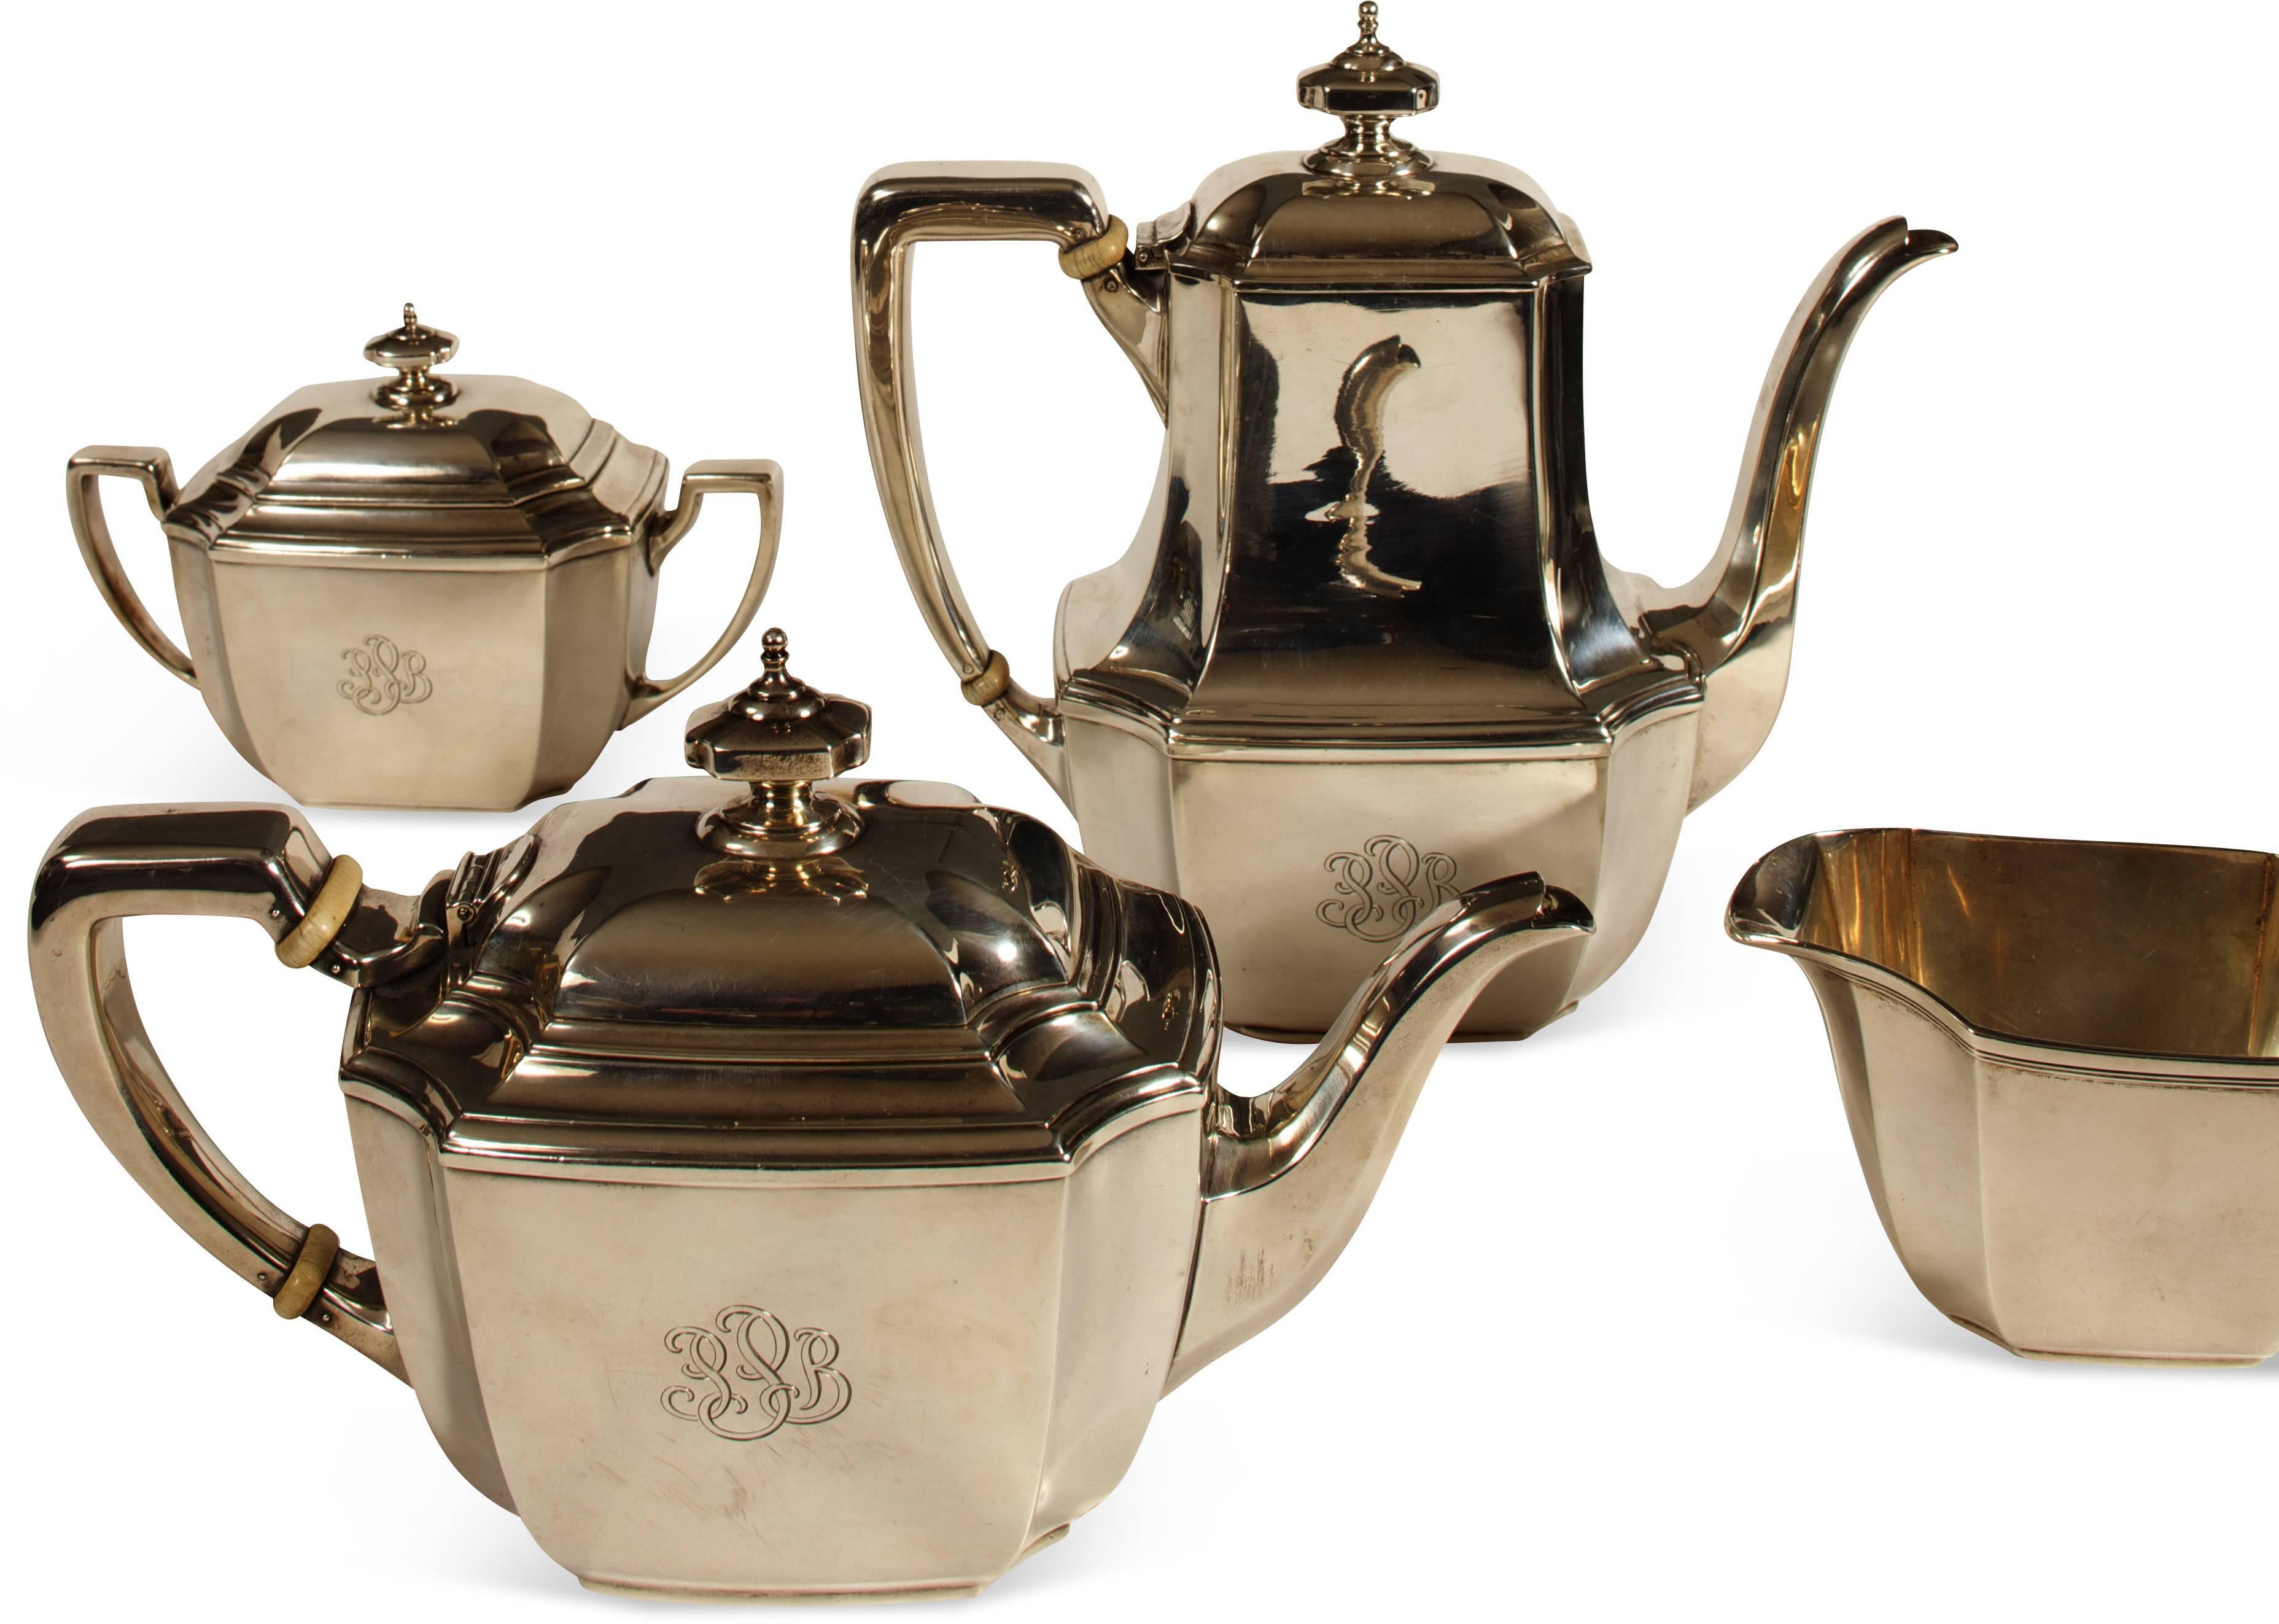 Tiffany & company four-piece sterling silver coffee and tea set, circa 1940. Comprised of coffee pot, tea pot, sugar and creamer, all with faceted corners and monogrammed 'PPB', all marked '18389' below. 66.6 T.O.
Price quoted is for the entire set